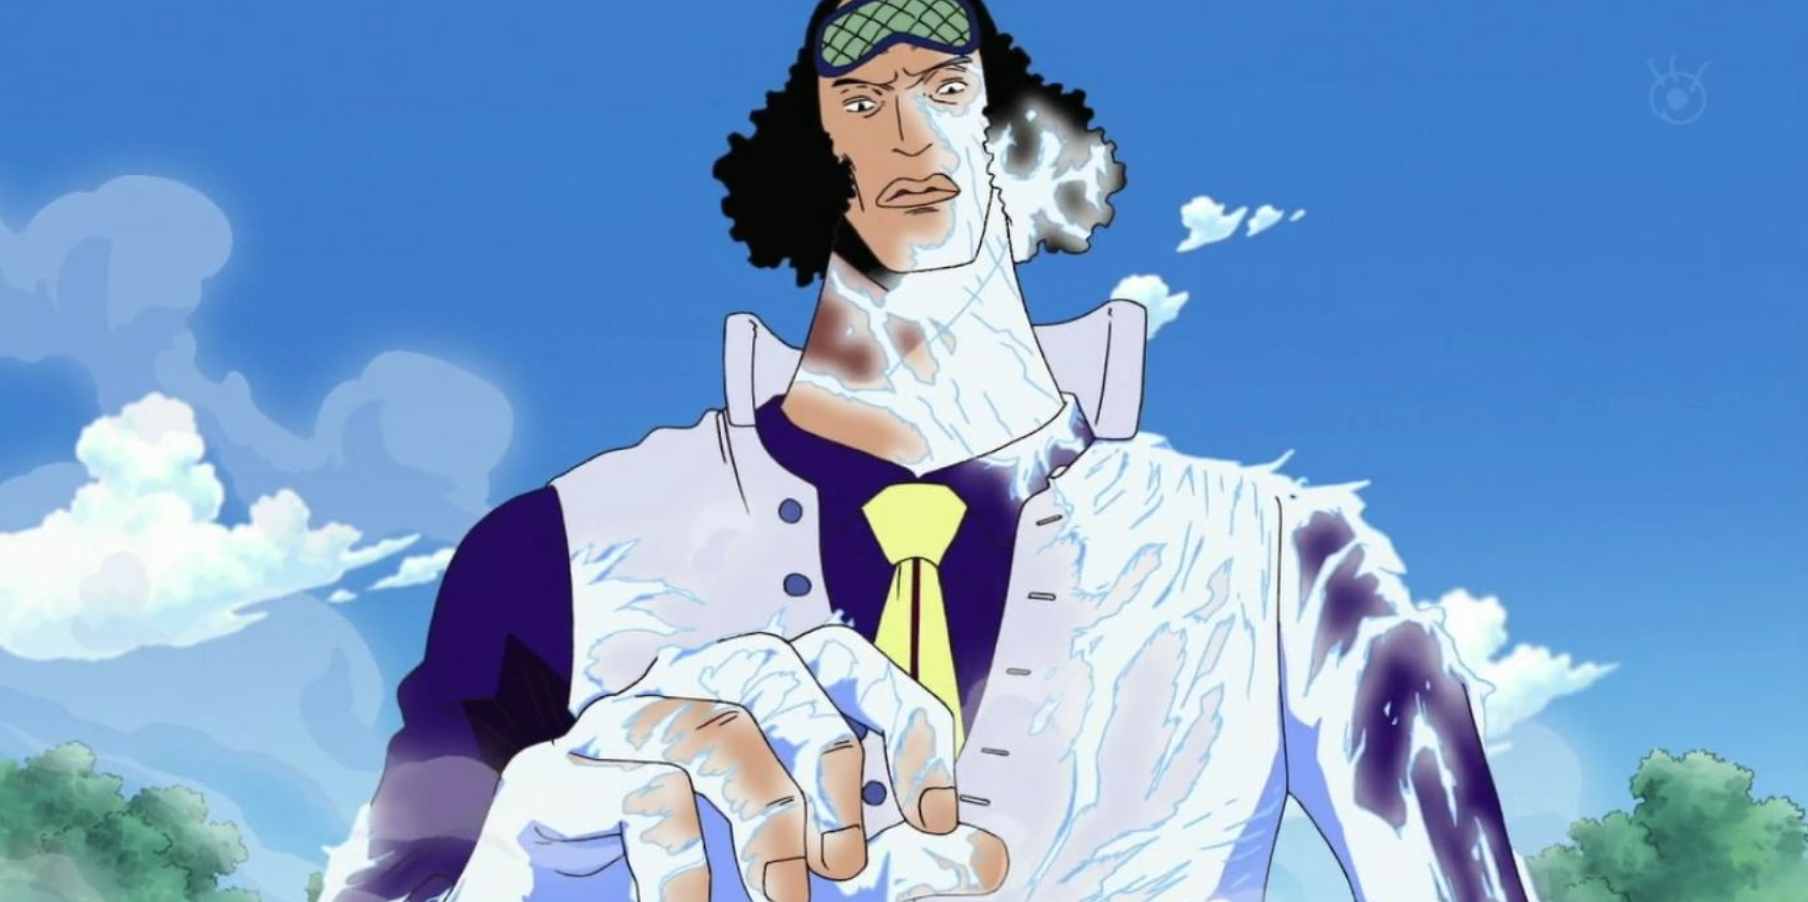 Admiral Aokiji prepares to attack the Straw Hats in One Piece